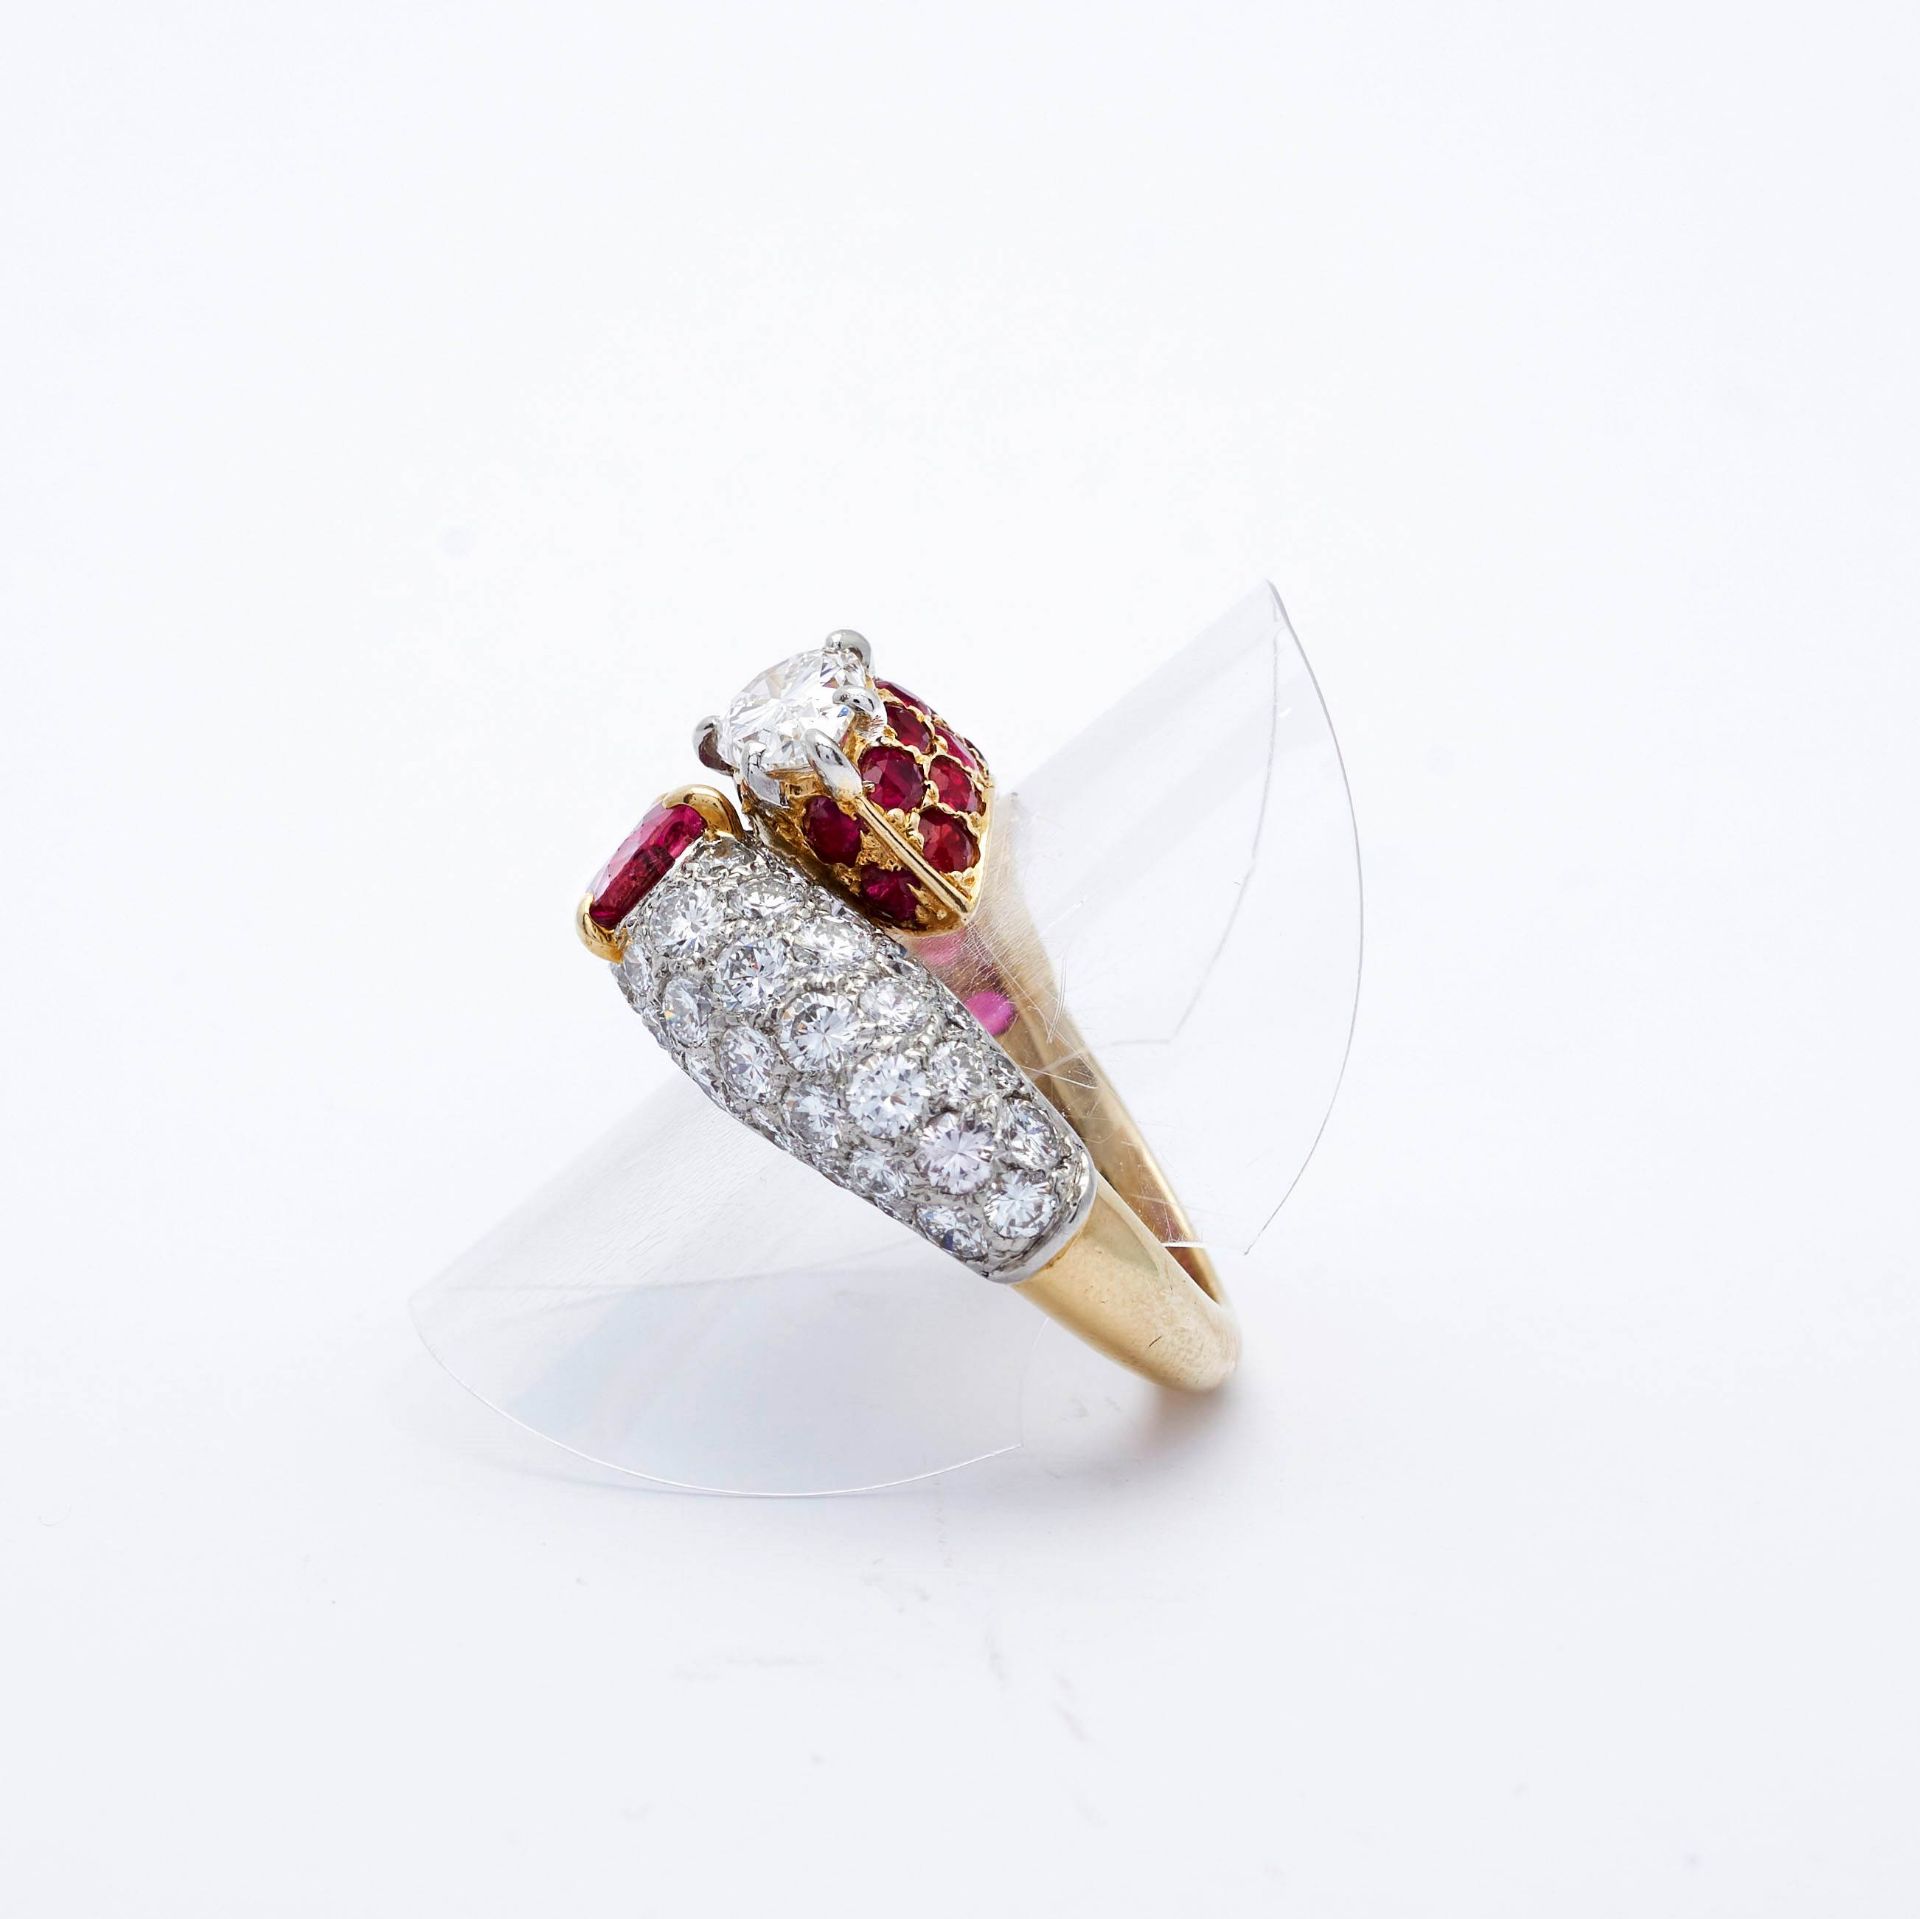 RUBY AND DIAMOND RING, BY CARTIER. - Image 4 of 8